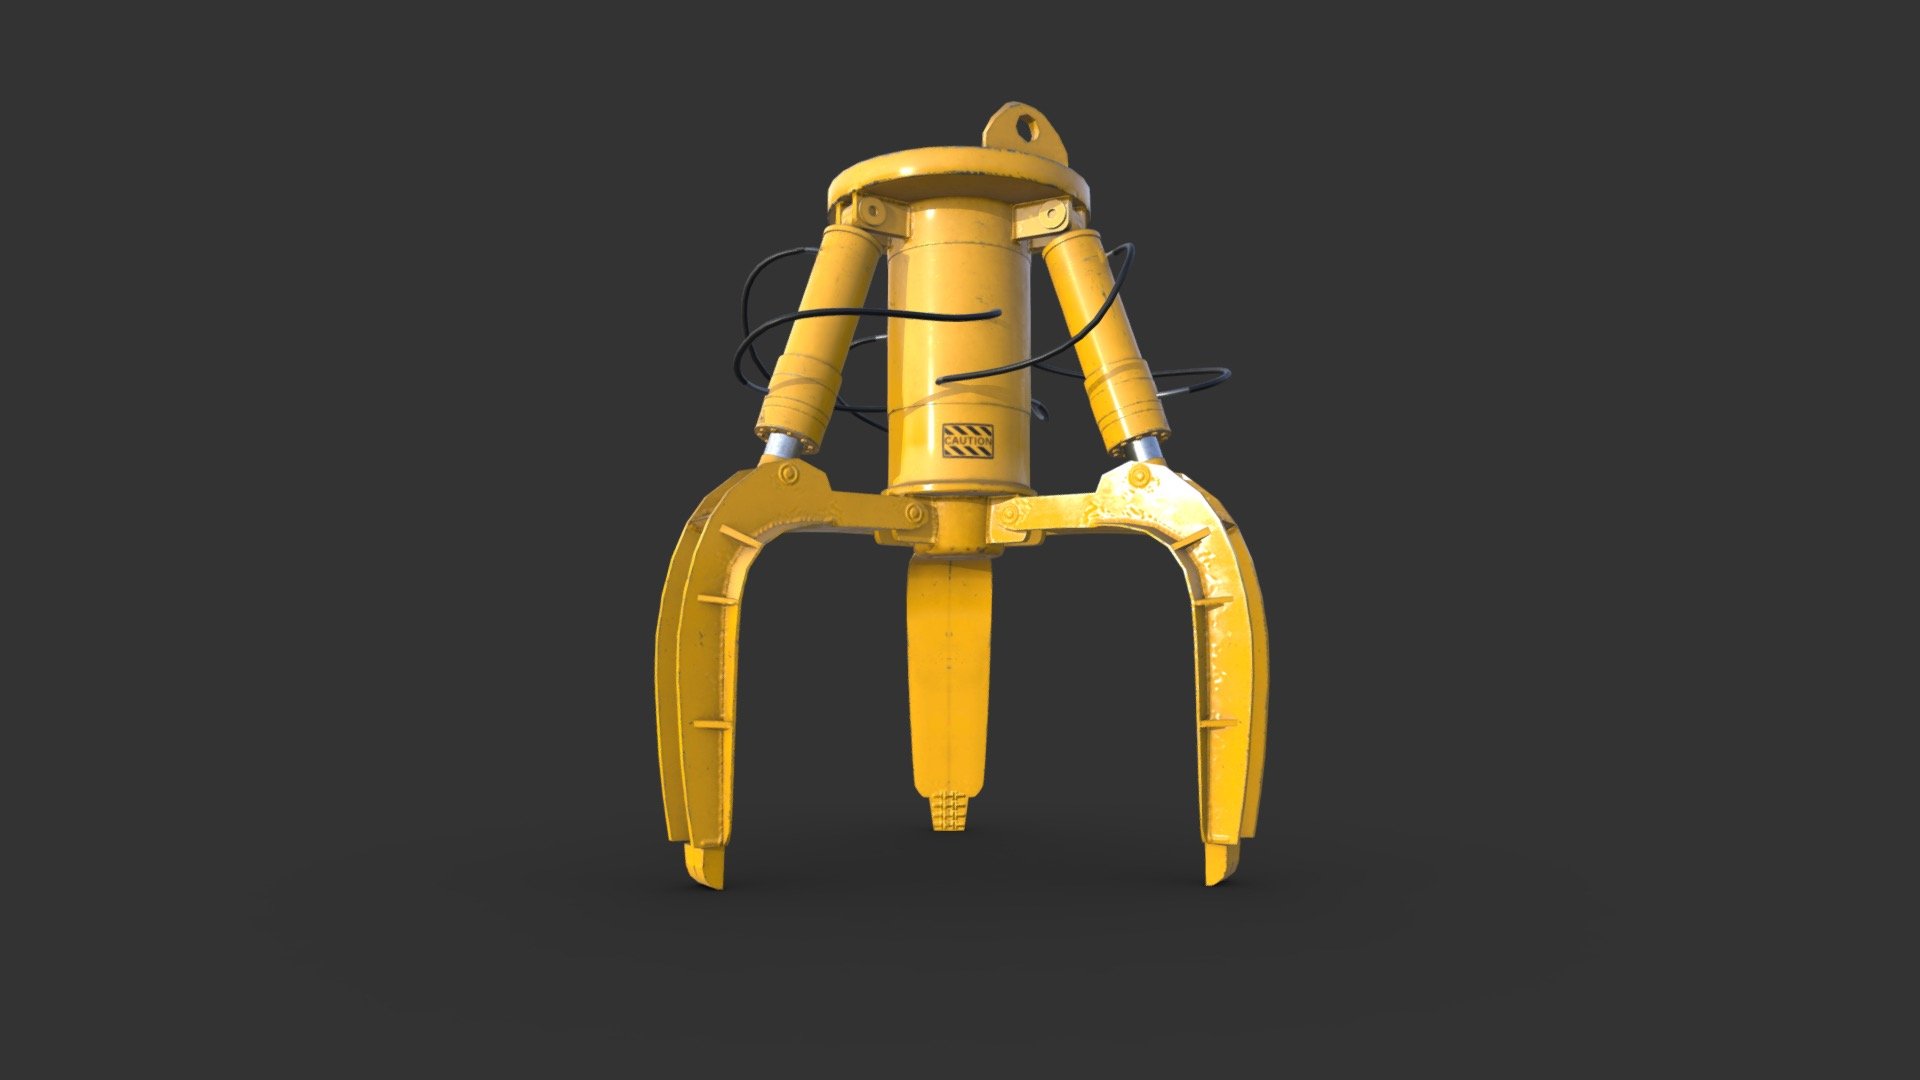 Hydrolic excavator made with Blender and textured on Substance Painter. 
The model is in low polygons and PBR ready for game 3d model